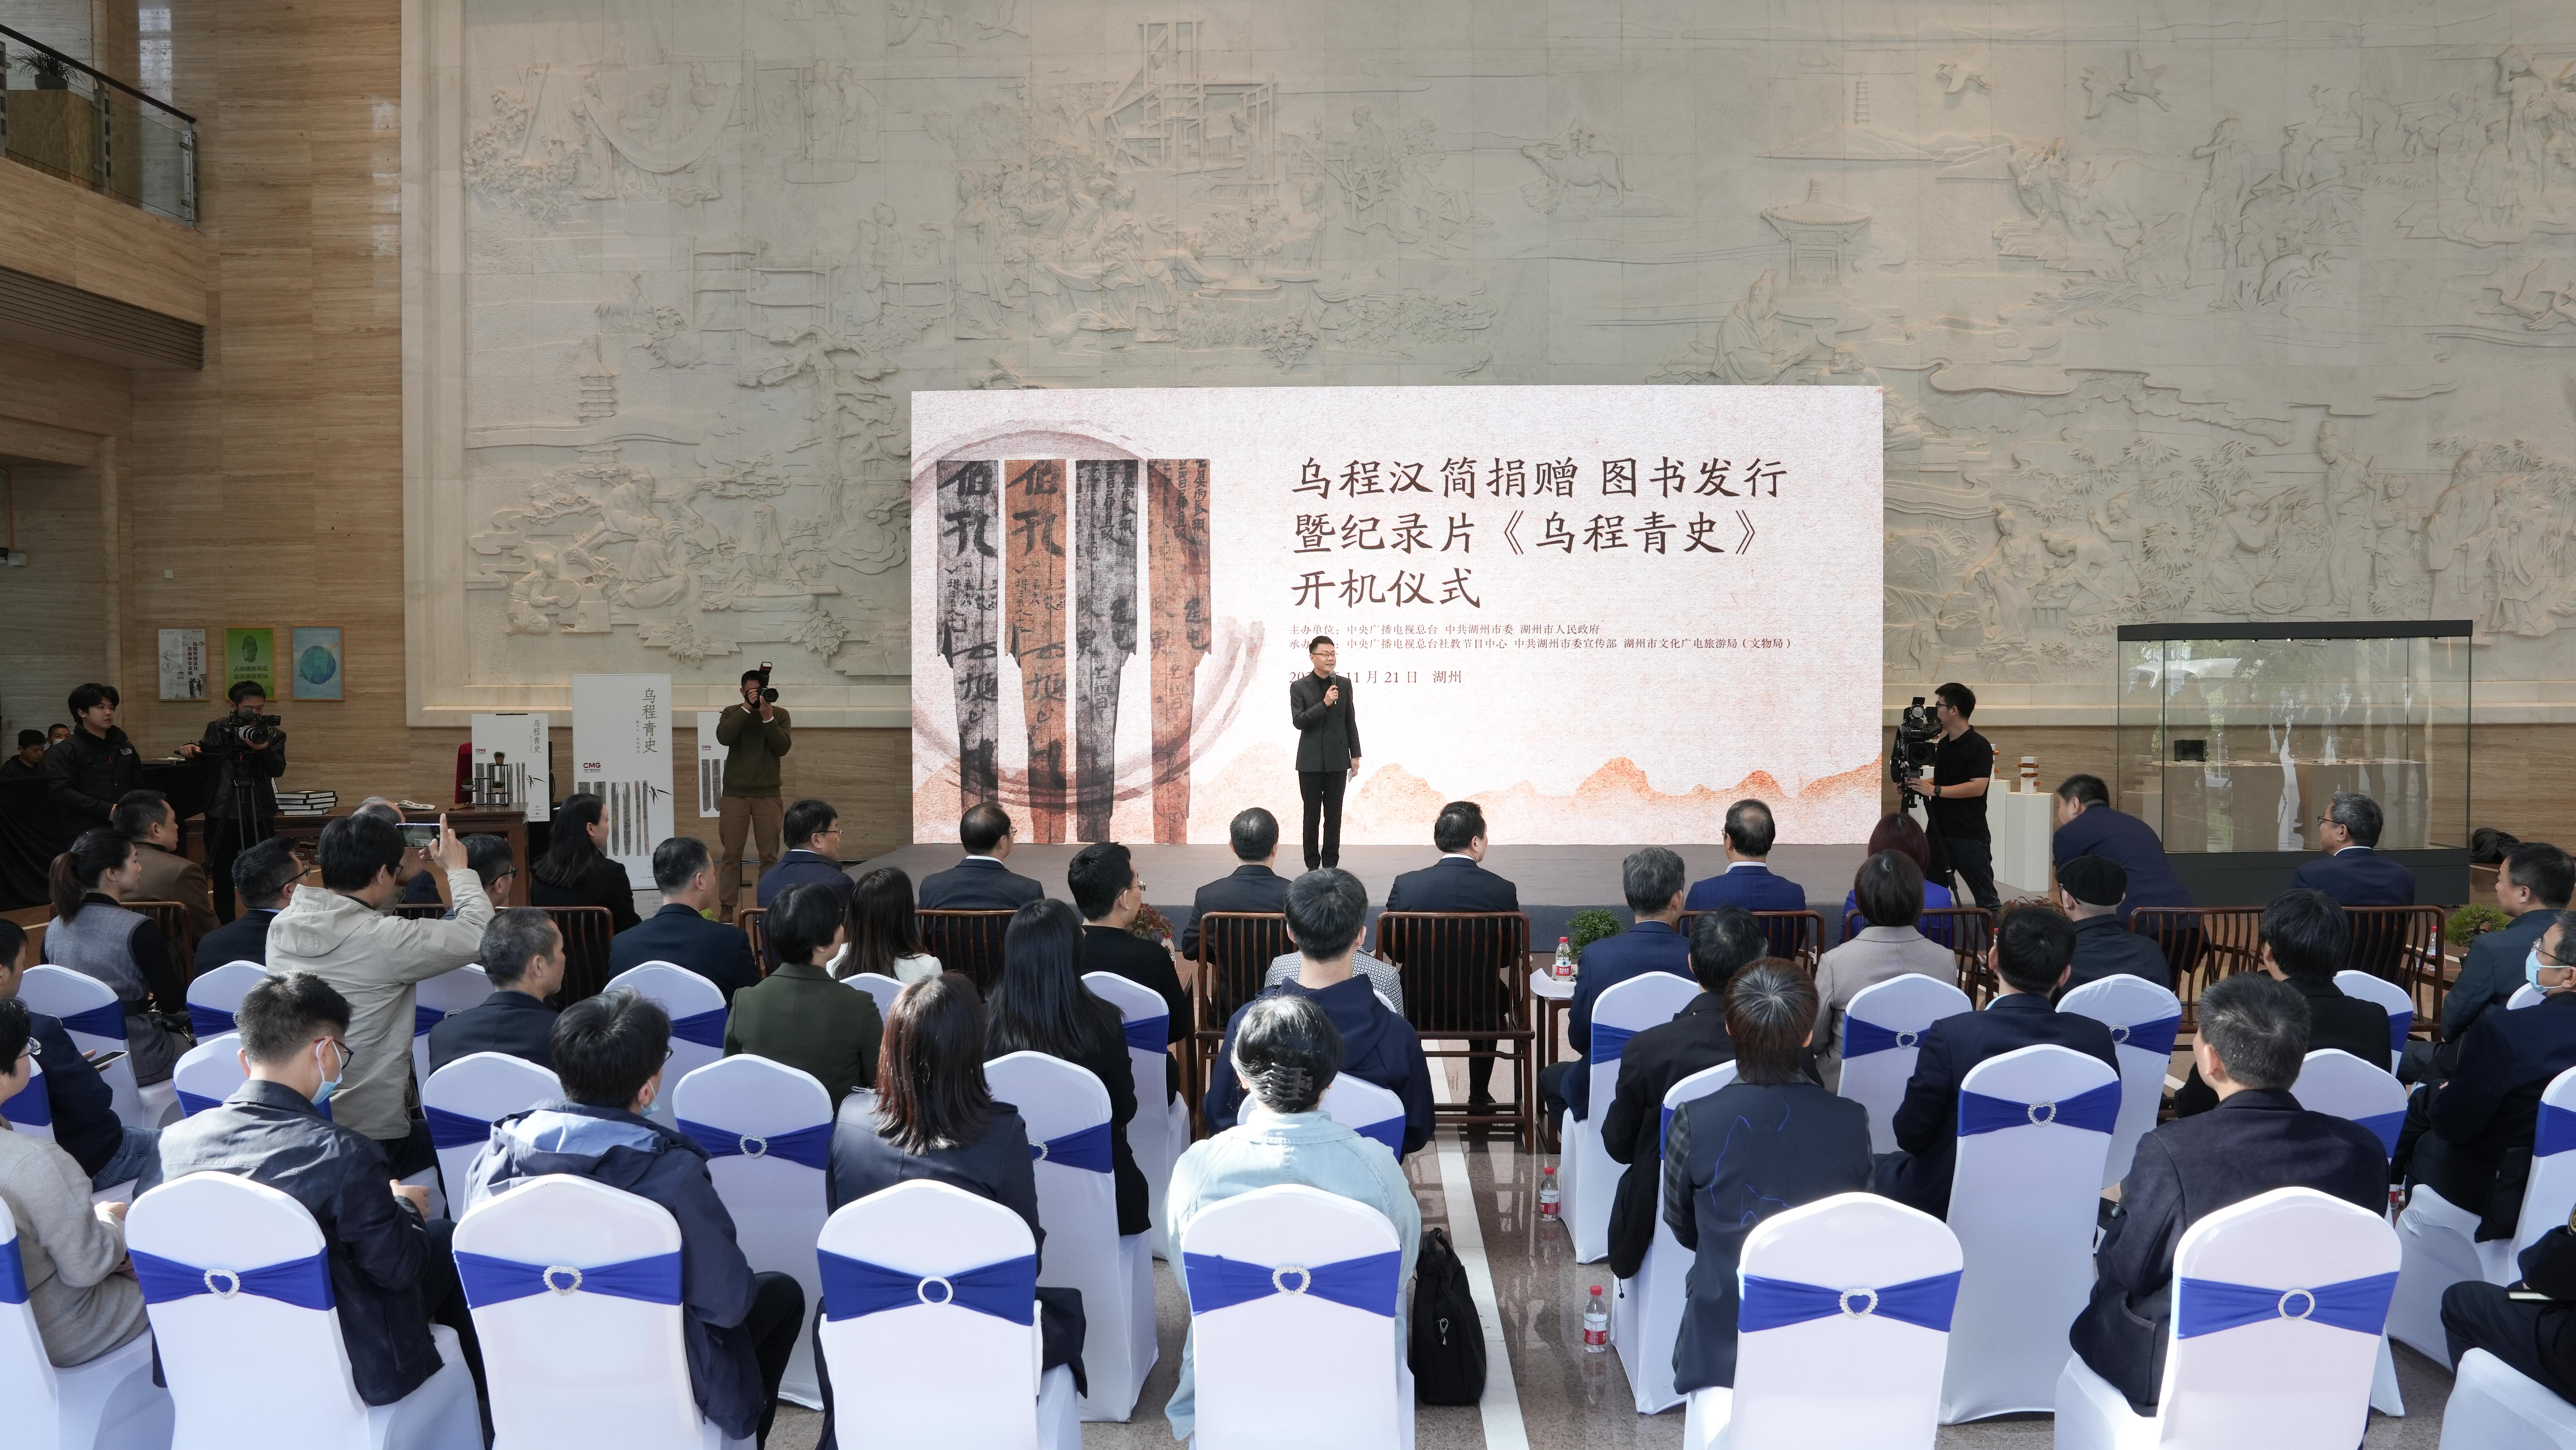 The opening ceremony of CMG's large-scale documentary at Huzhou City Museum in Zhejiang Province, China, November 21, 2022. /CMG